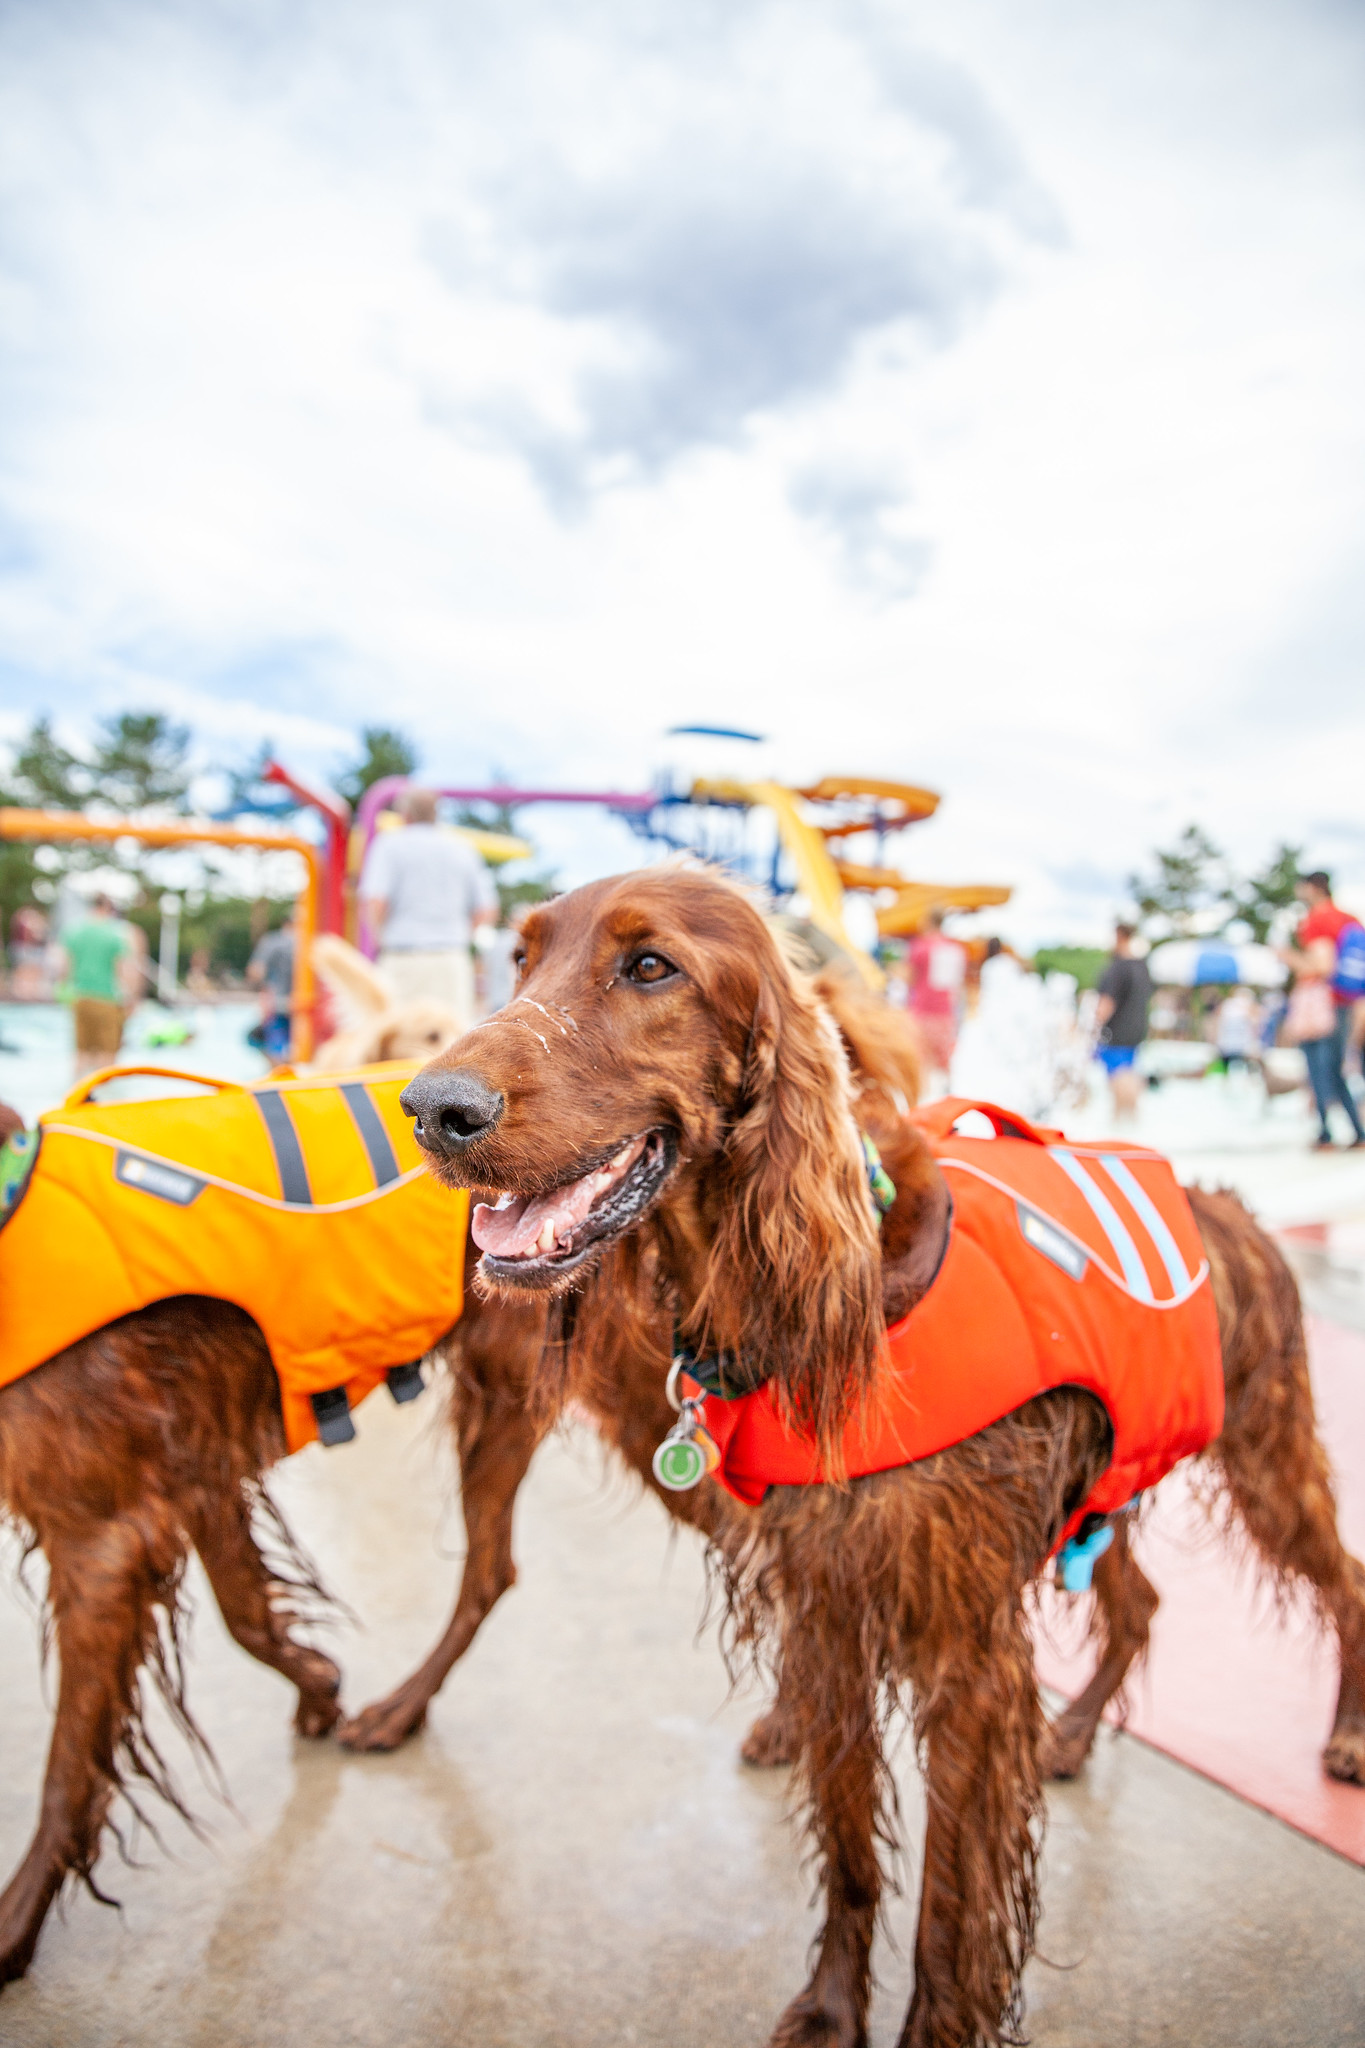 Irish Setters wearing life jackets in Fort Collins, Colorado - John Robson Community Lifestyle Photography